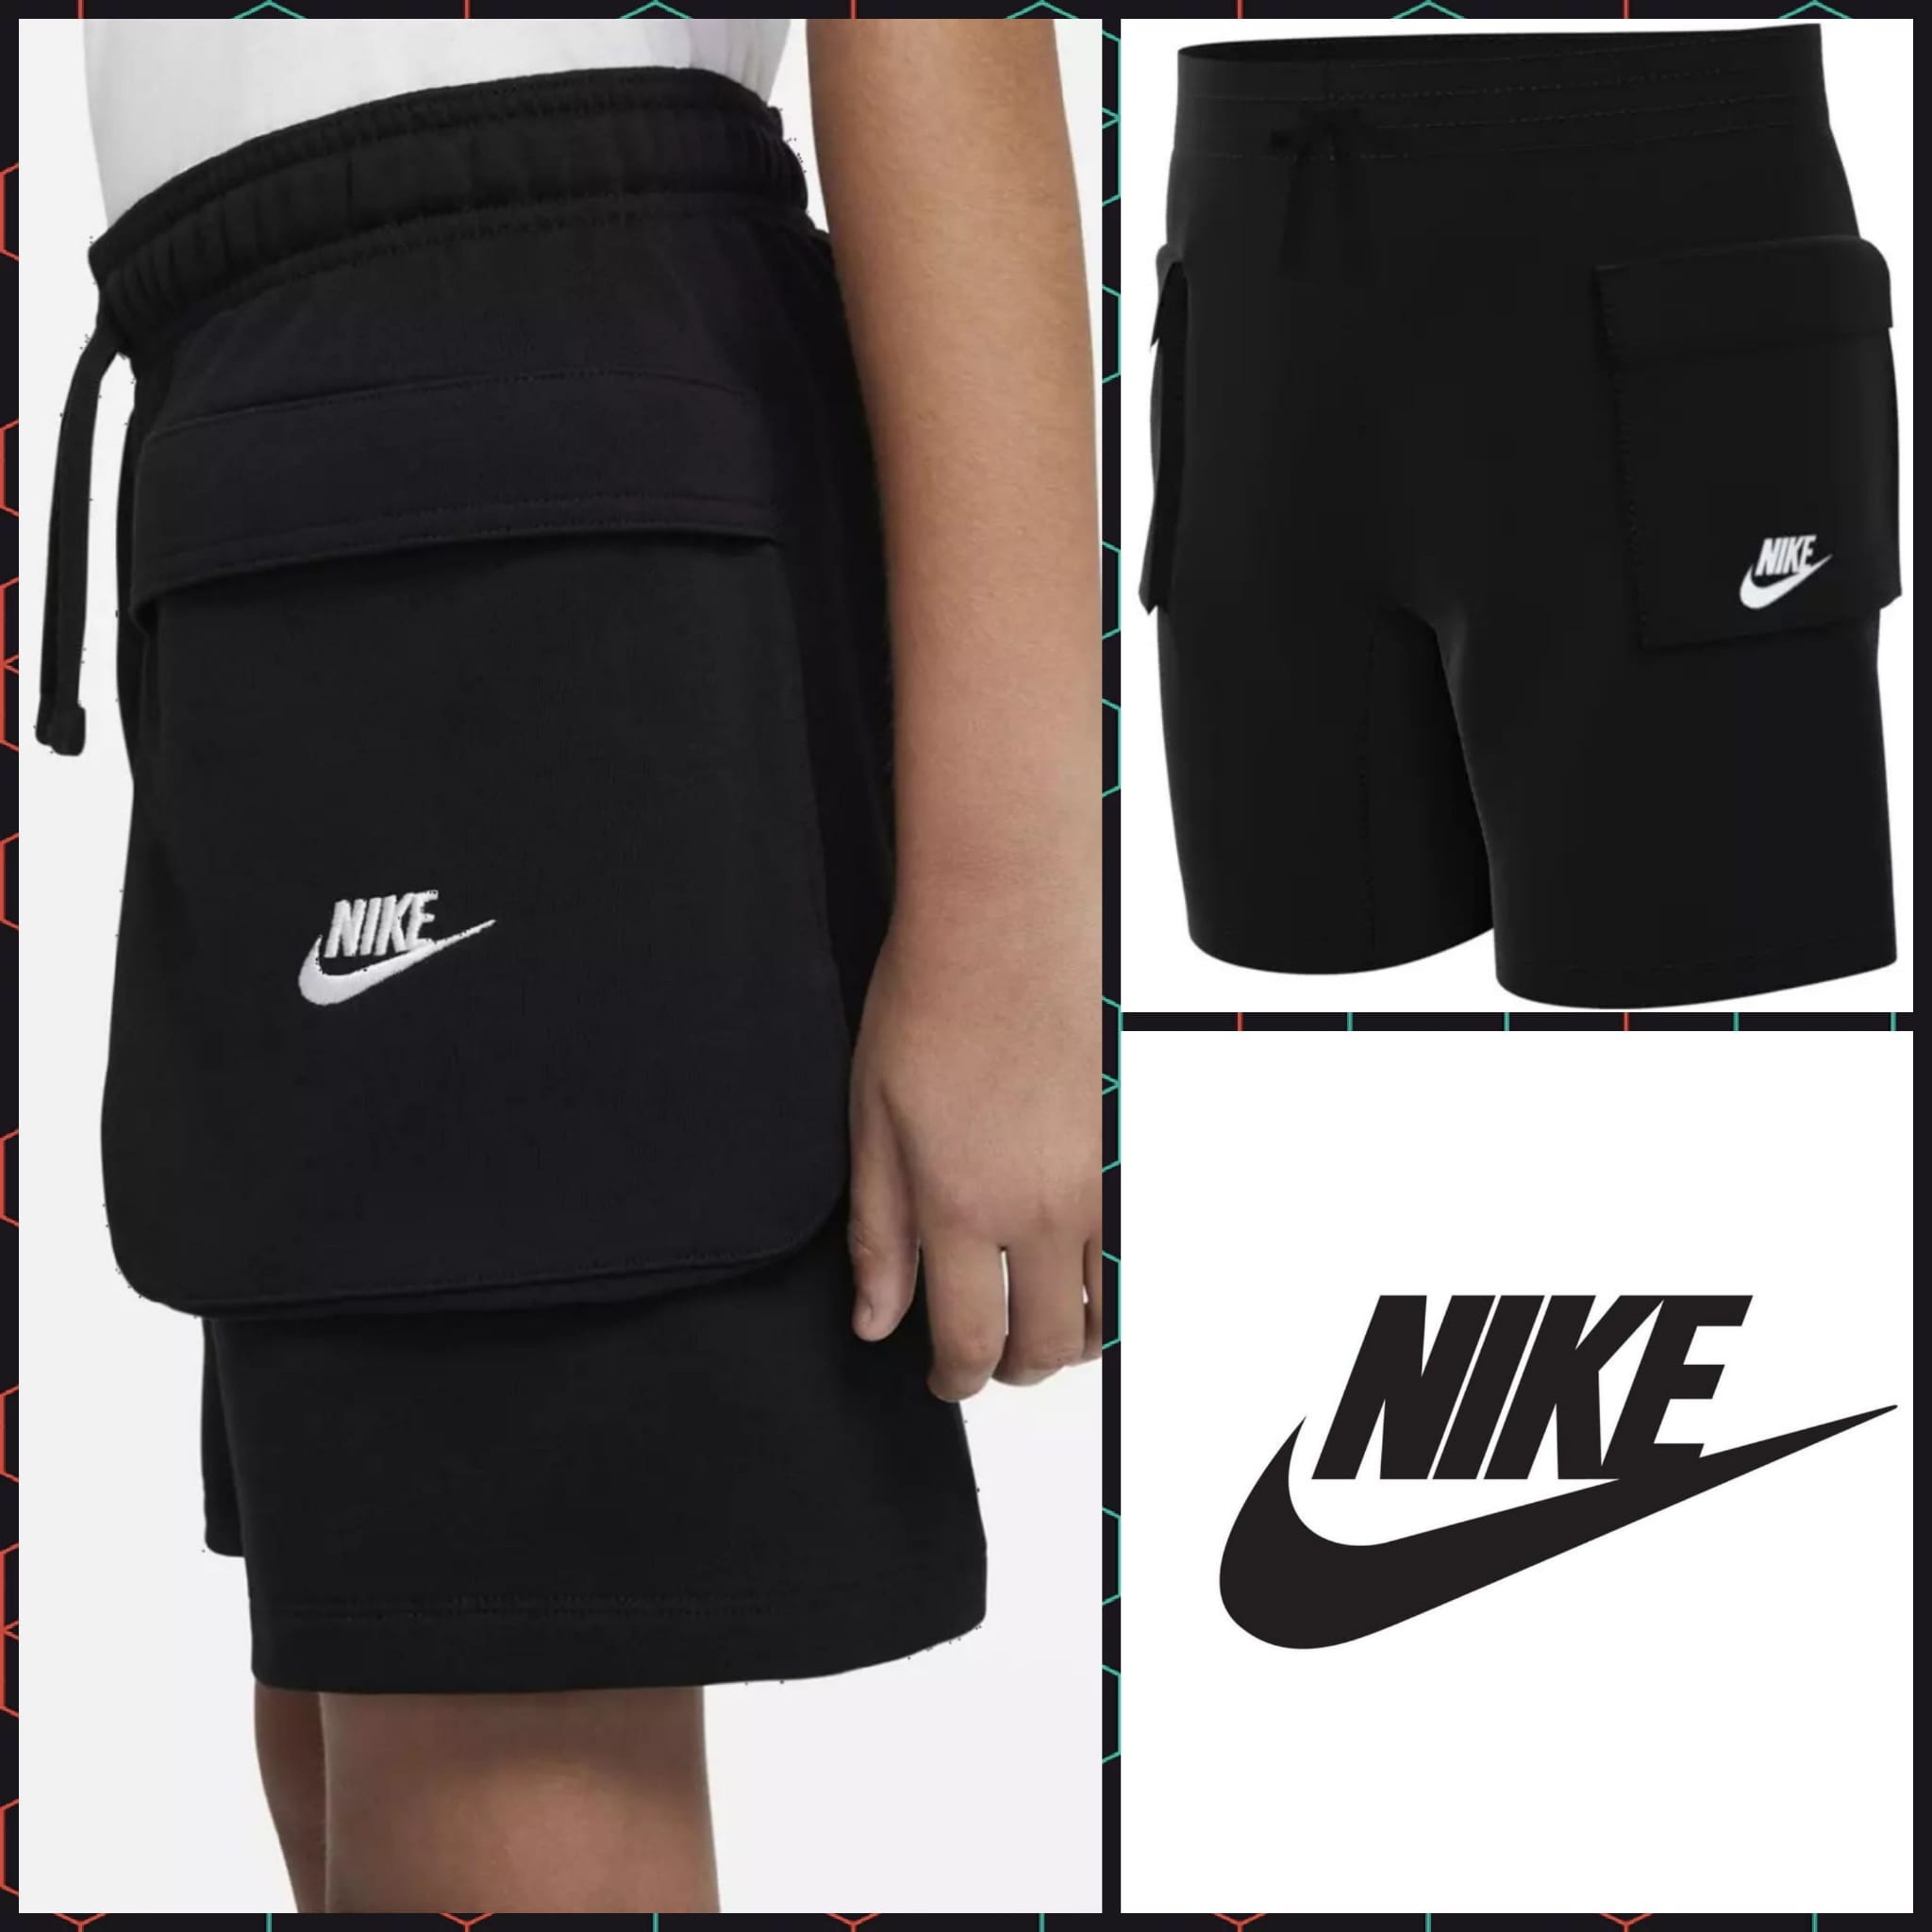 Teen sports shorts from Nike